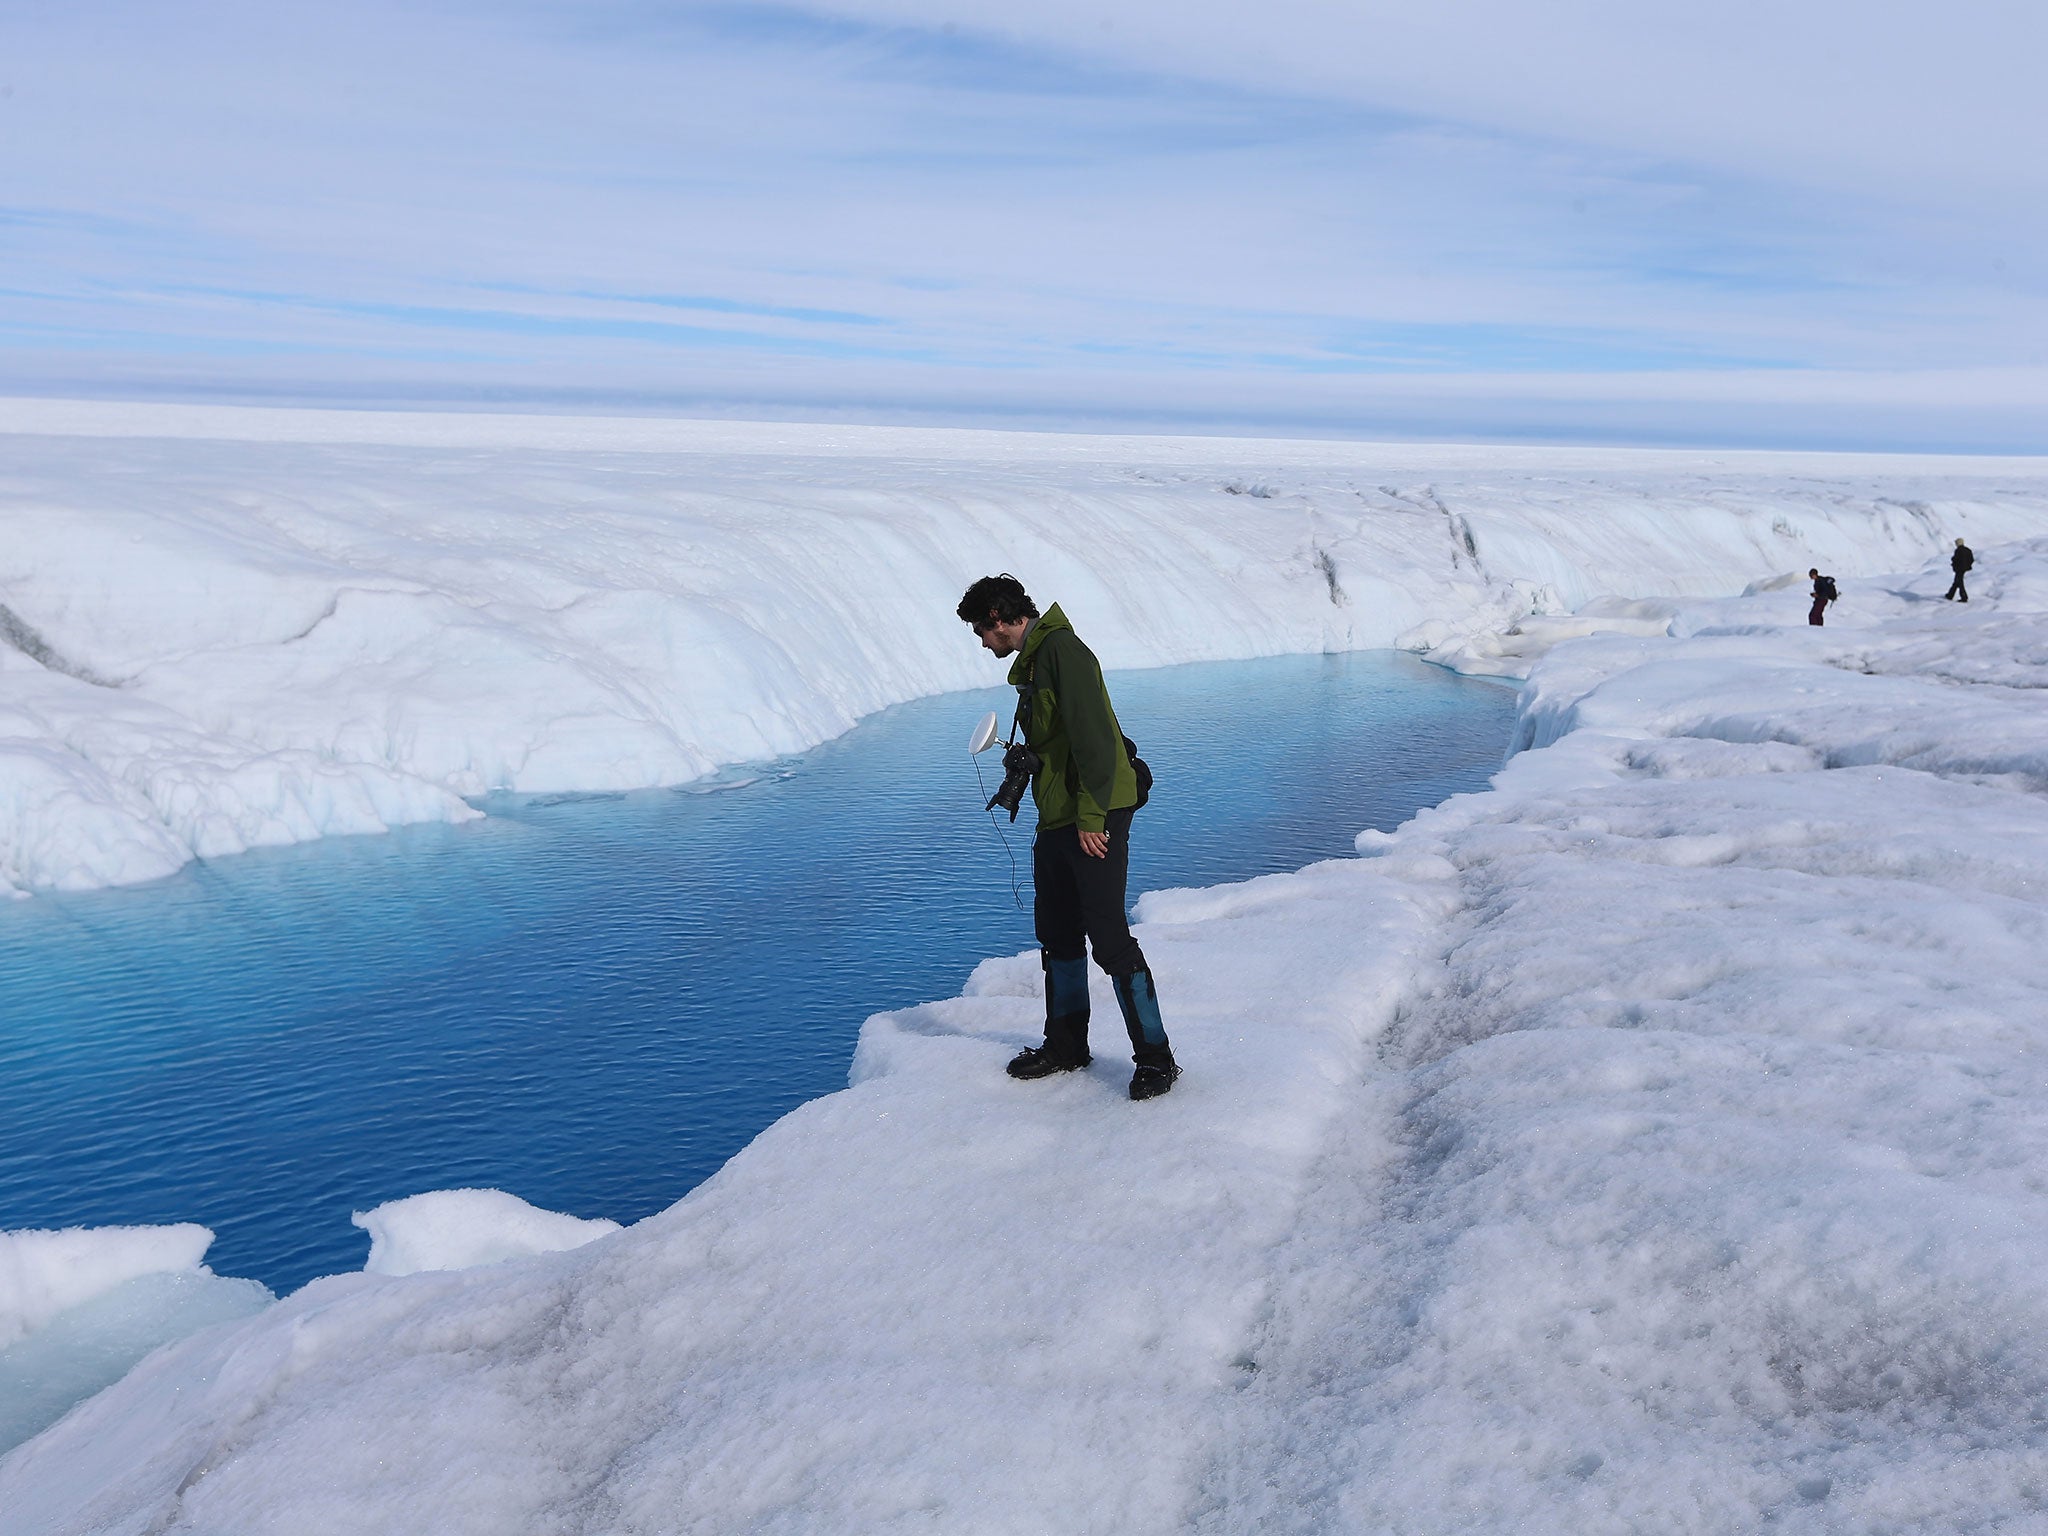 A glacial ice sheet in Greenland: global warming is melting ice and raising sea levels